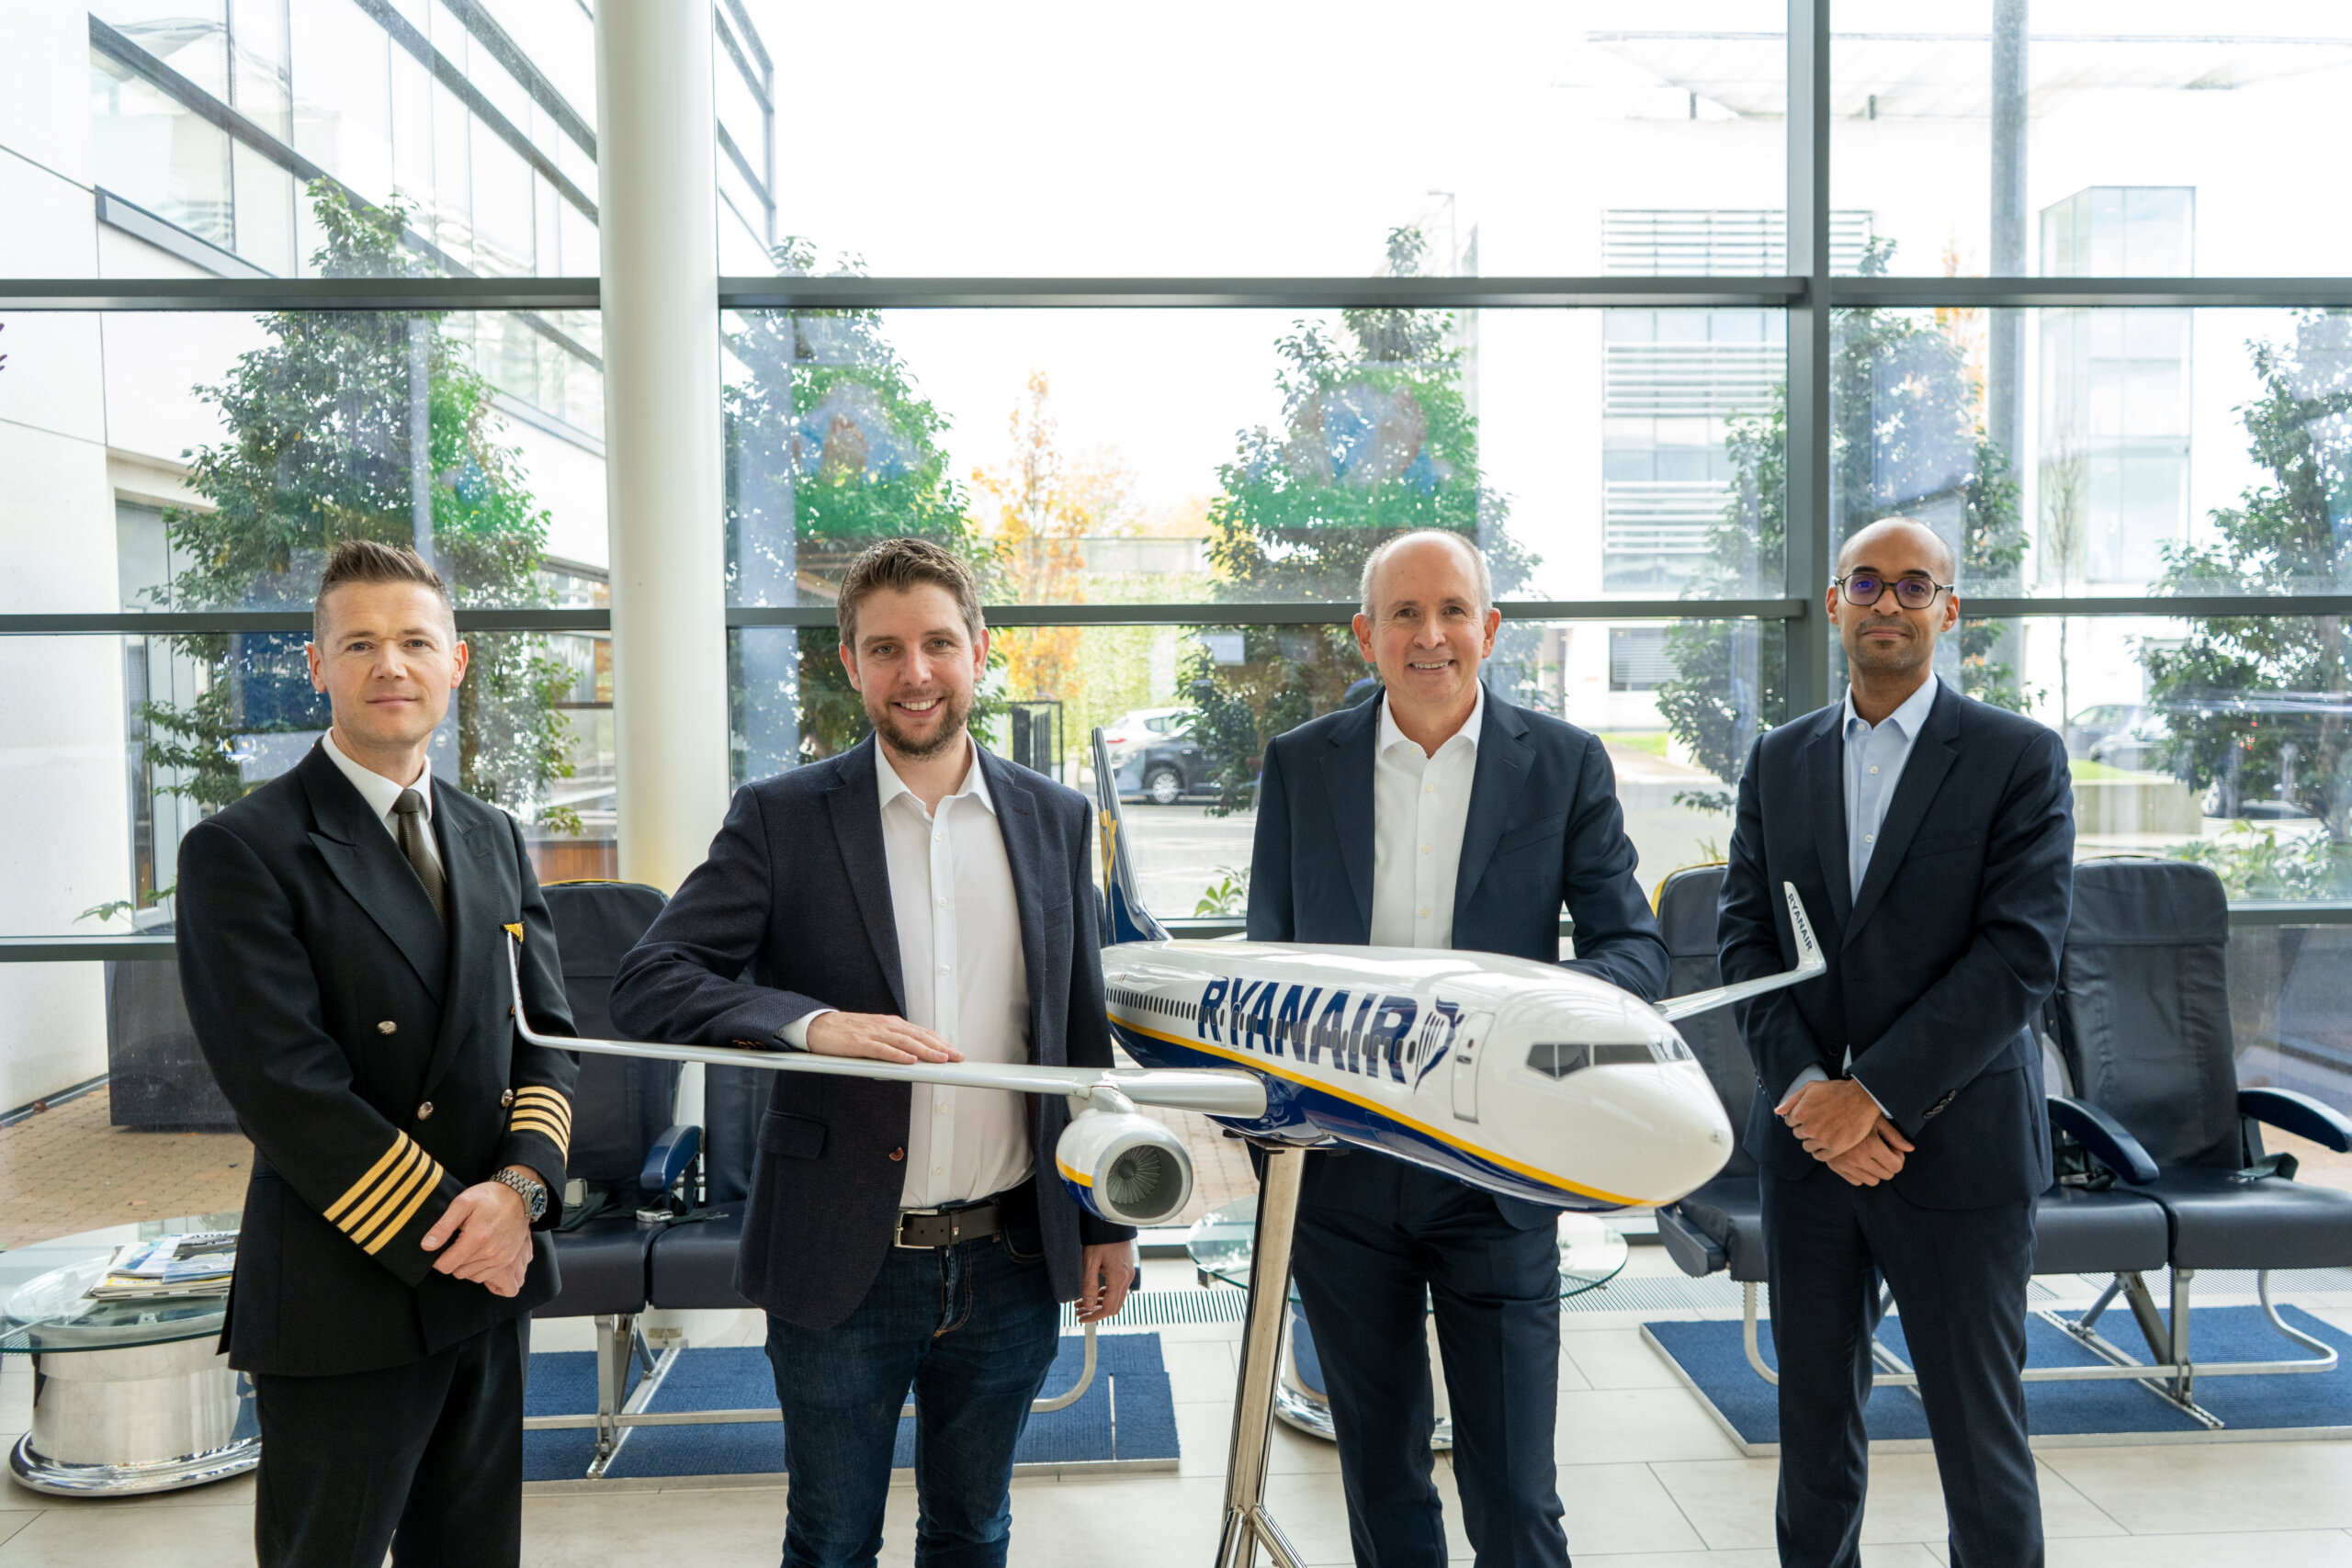 Ryanair Signs 5-Year Partnership Extension With CEFA Aviation